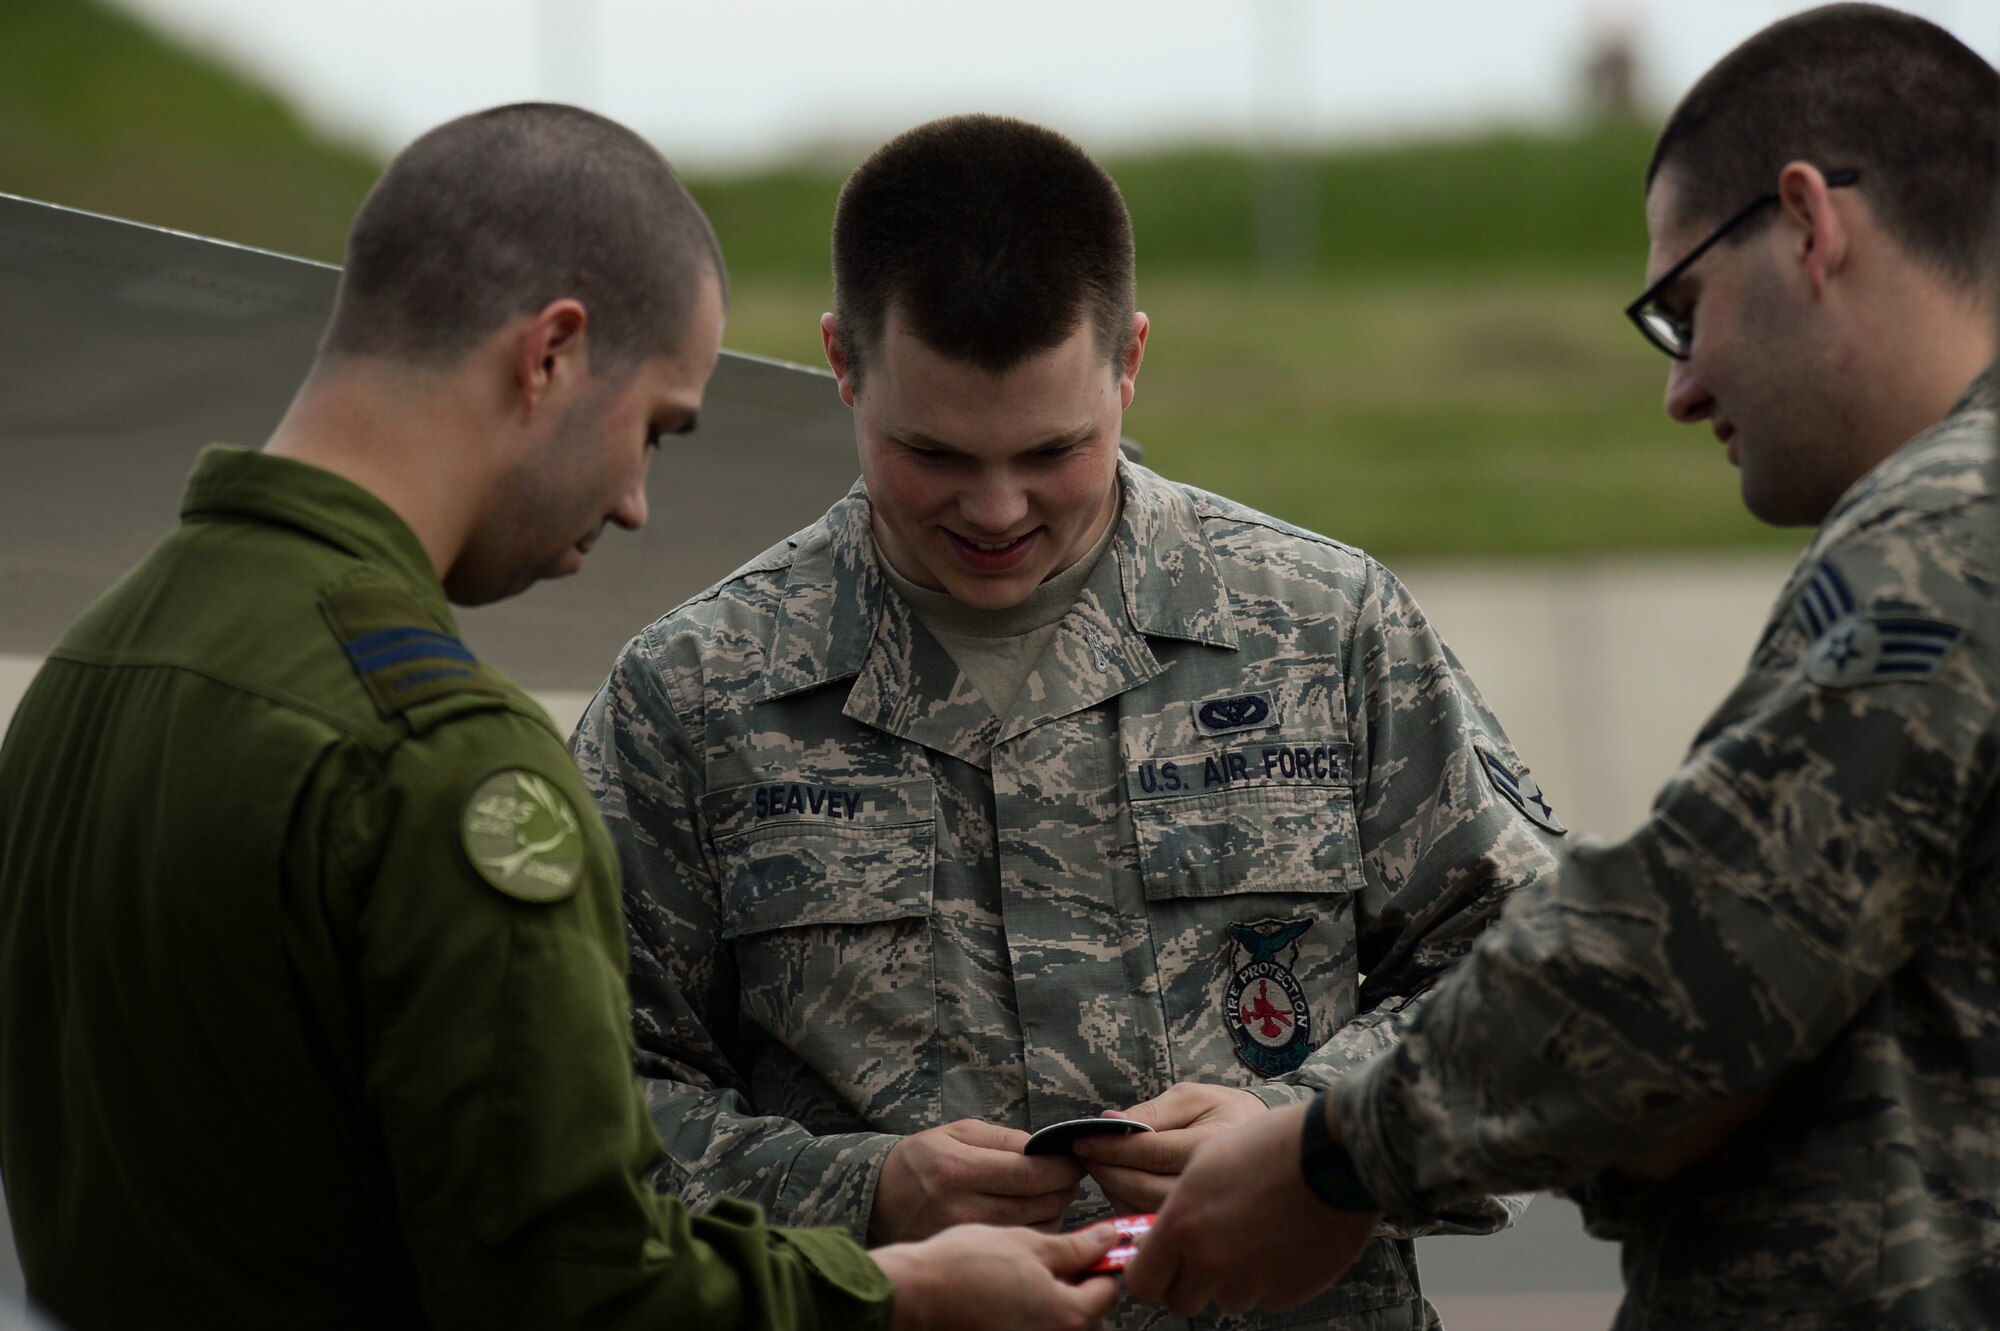 U.S. Air Force Airman 1st Class Jason Seavey (center), a 52nd Civil Engineer Squadron fire protection apprentice from Baileyville, Maine, and Senior Airman Steven Mueller, a 52nd CES fire protection journeyman from Kerrville, Texas, exchange patches with a pilot from the Royal Canadian Air Force May 1, 2014, at Spangdahlem Air Base, Germany.  The 52nd Fighter Wing hosted members of the RCAF as they traveled to Romania to support combined NATO exercises as part of a persistent presence in the region. (U.S. Air Force photo by Senior Airman Rusty Frank/Released)